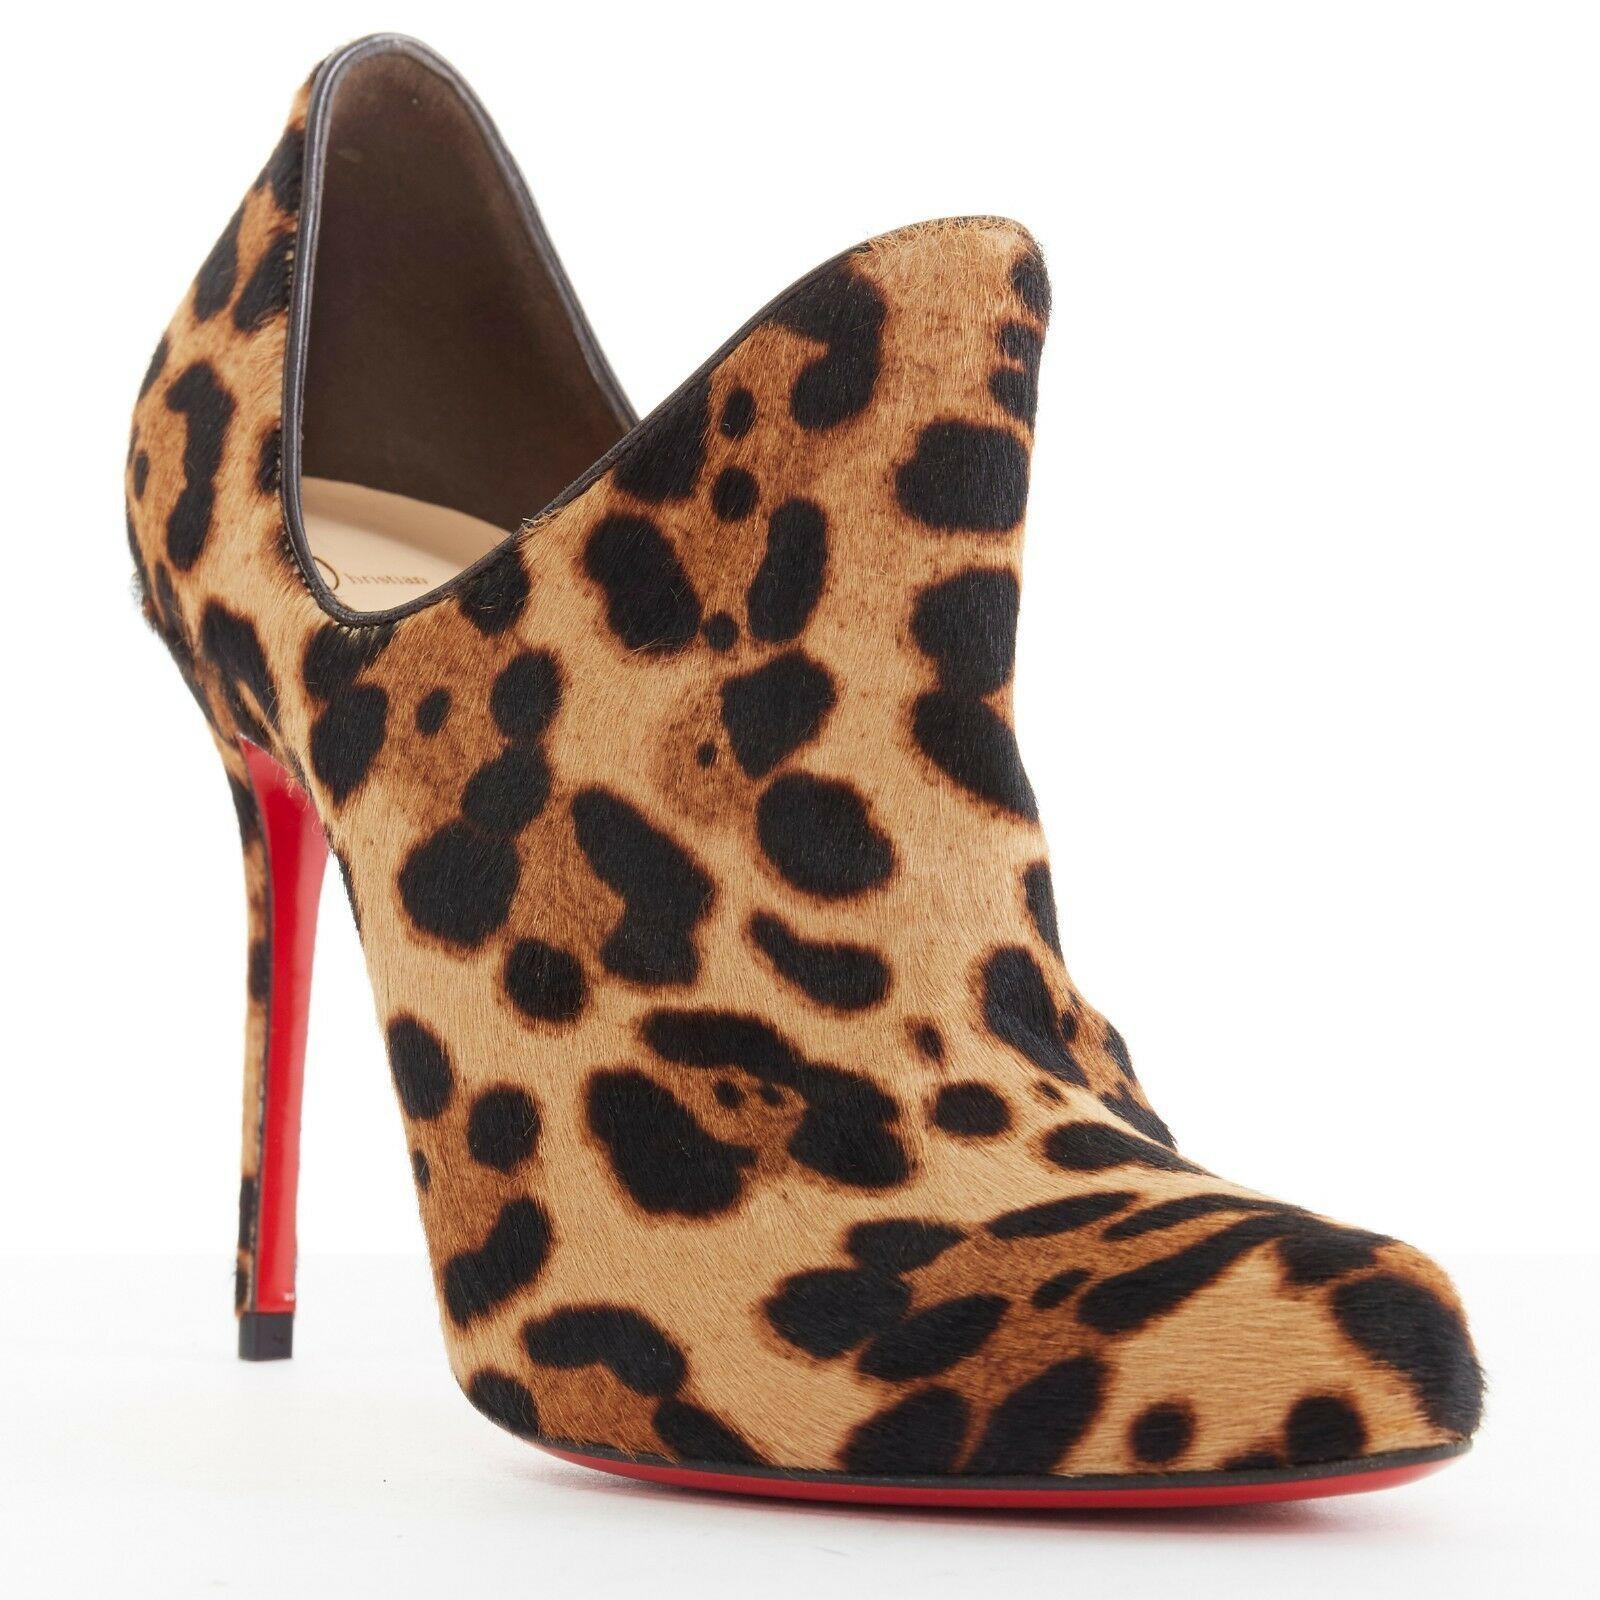 new CHRISTIAN LOUBOUTIN Dugueclina 100 leopard calf dipped stiletto bootie EU37
CHRISTIAN LOUBOUTIN
Leopard print calf hair leather. Dipped cut out side. 
Tonal stitching. Almond toe. Covered heel. Stiletto high heel. 
Tan leather lining. Padded